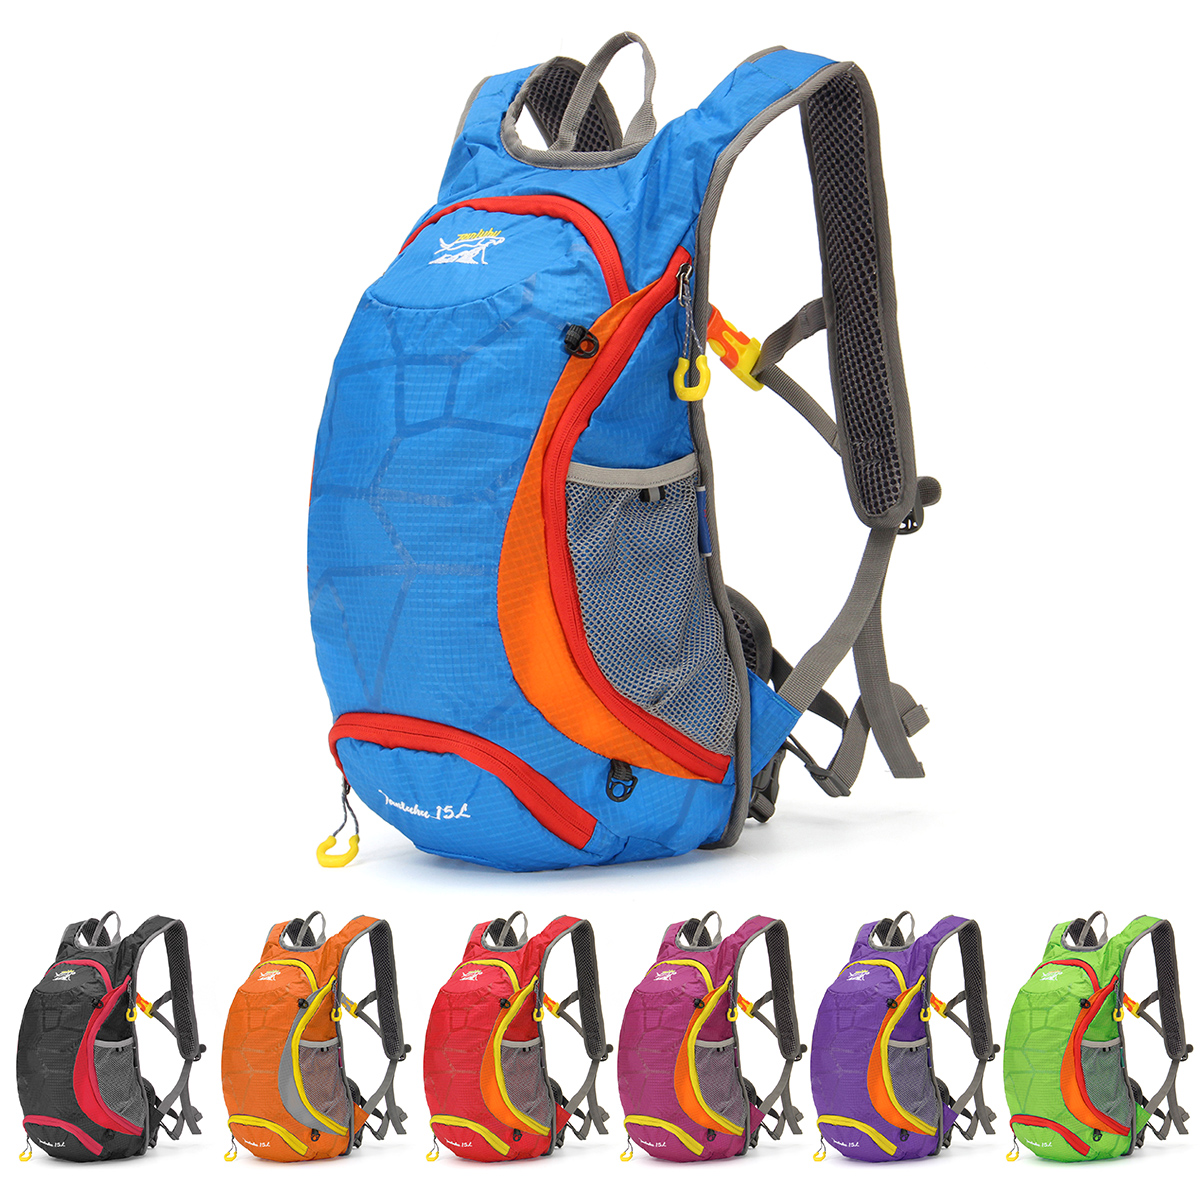 15L HYDRATION PACK WATER RUCKSACK BACKPACK CYCLING HIKING BLADDER BAG RED